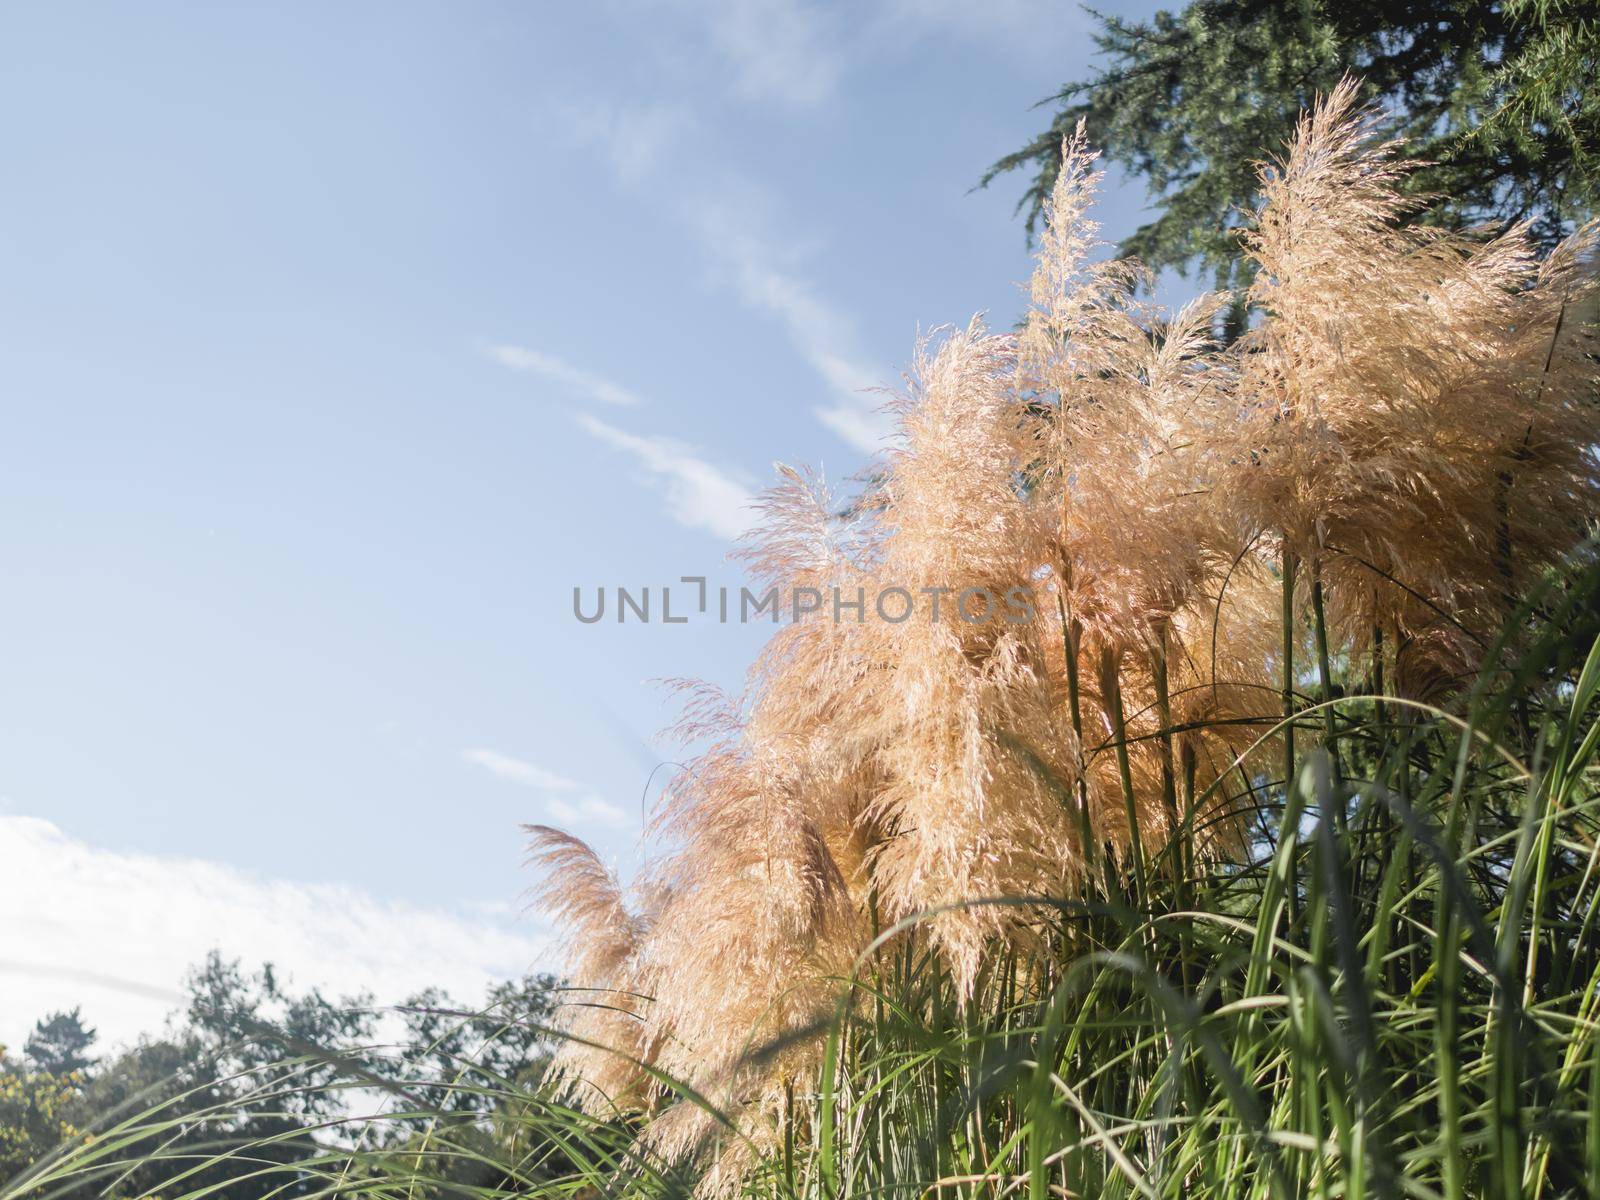 Pampas grass or Cortaderia selloana. Thick and fluffy plant on clear blue sky background.